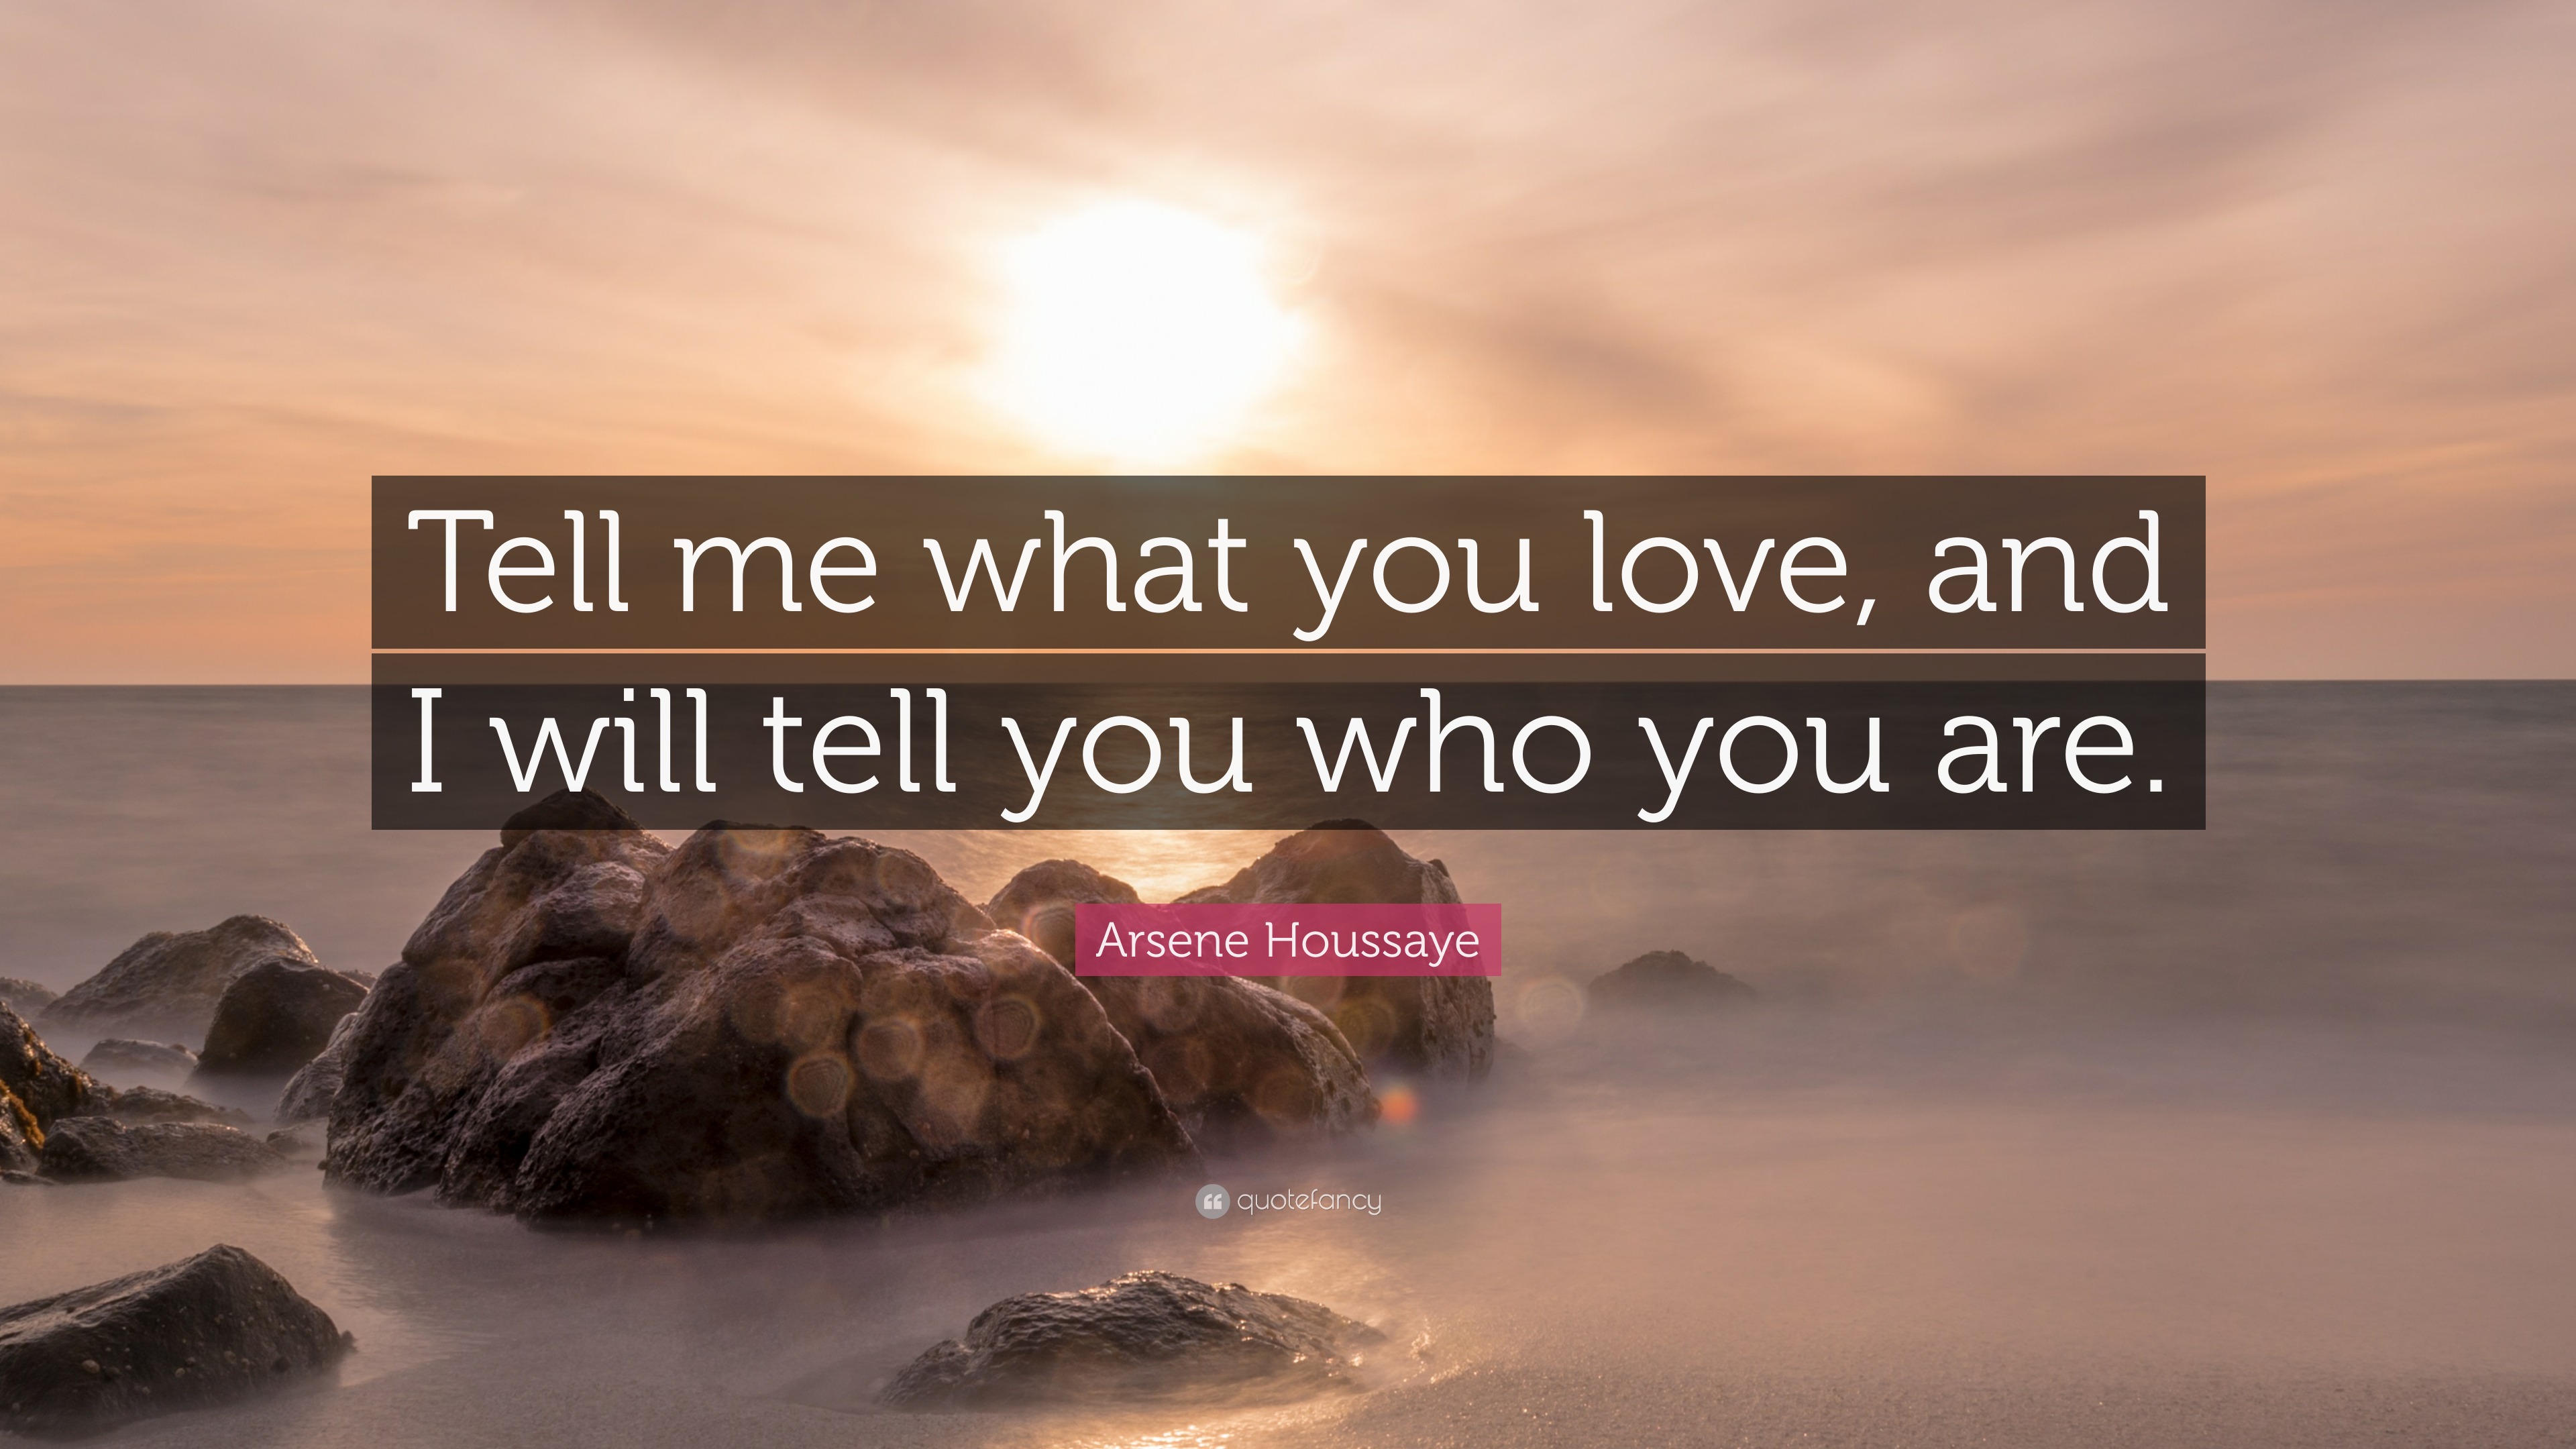 Arsene Houssaye Quote: “Tell me what you love, and I will tell you who ...